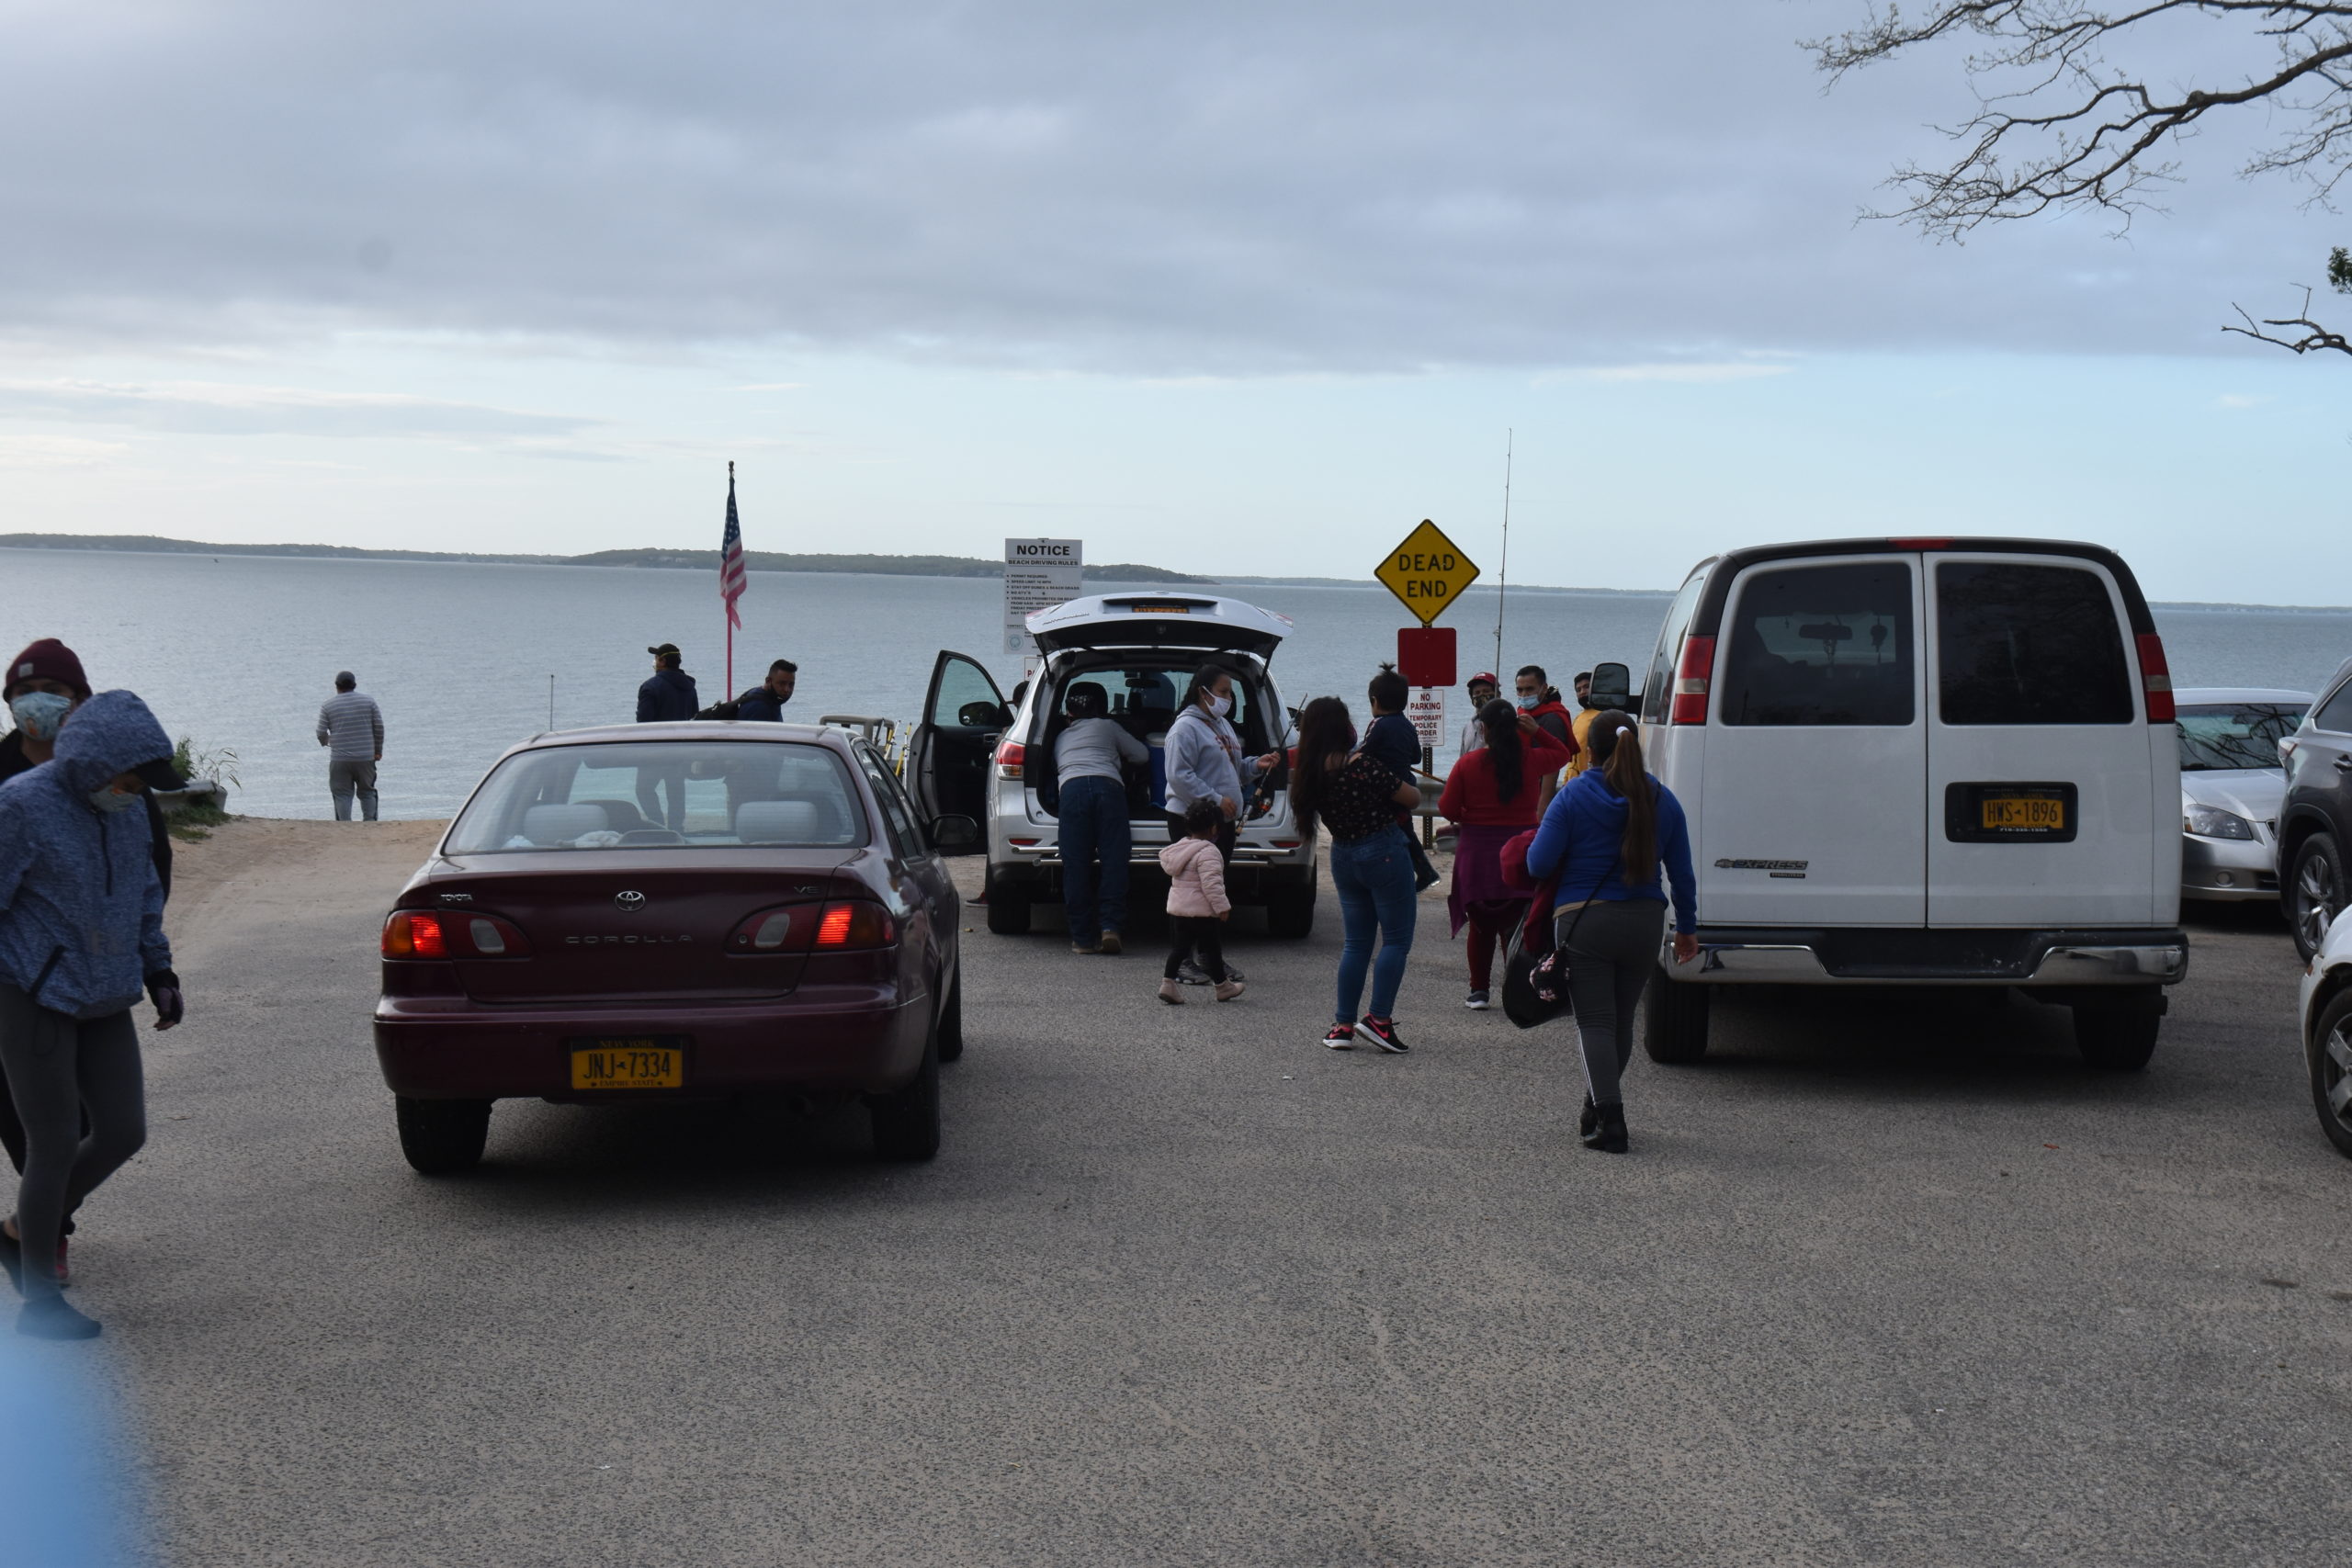 Families, many of whom said they drove out from Queens and Brooklyn, arrive at North Sea Beach Friday night. STEPHEN J. KOTZ